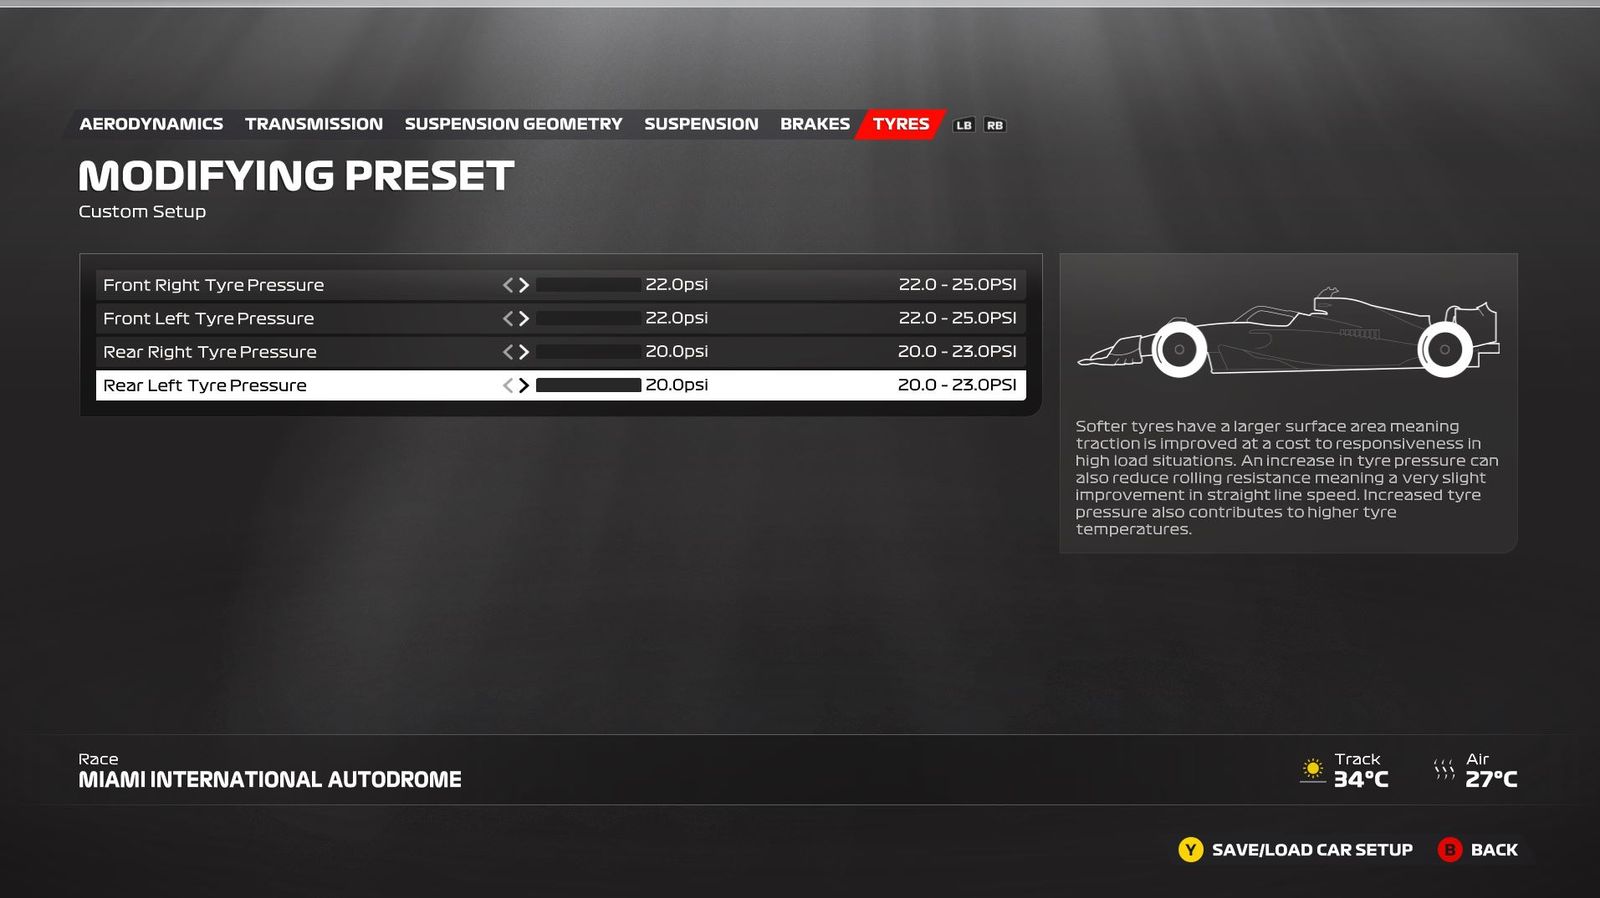 F1 23 Miami setup tyres screen showing the ideal settings